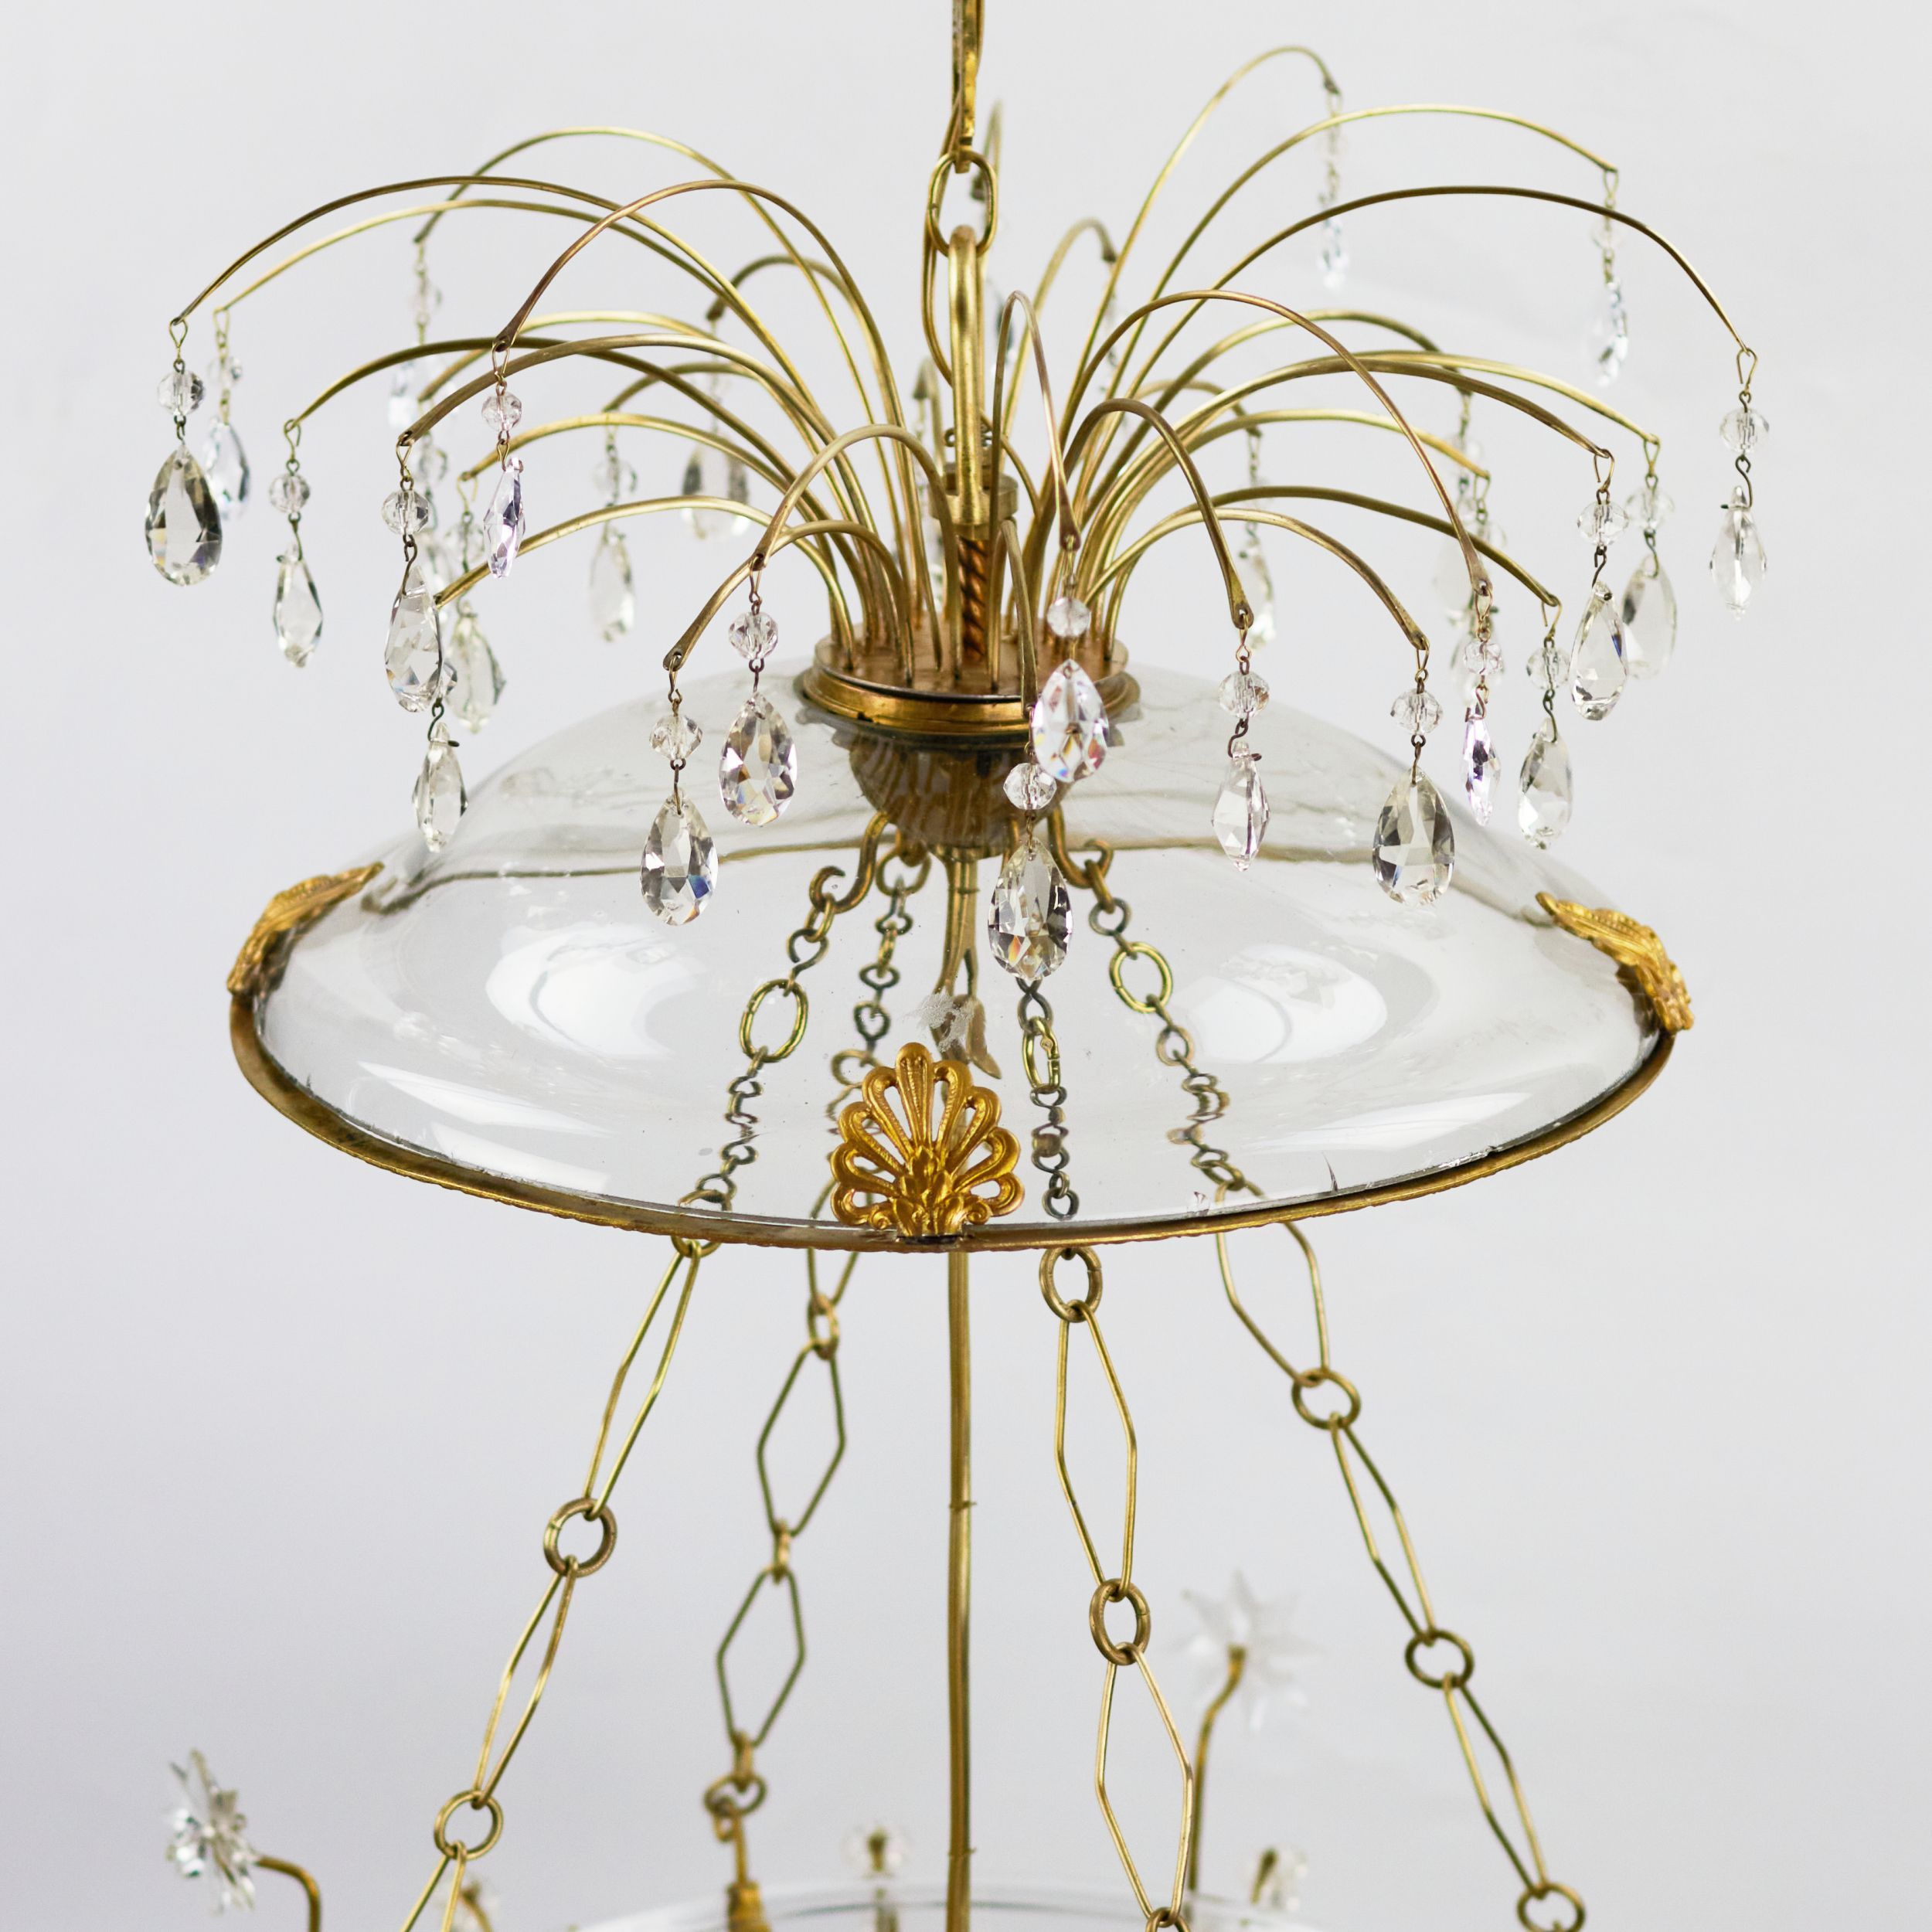 Russian Crystal & Ormolu Mounted Two-Light Lantern Chandelier.Russia, early 19th century. - Image 4 of 5